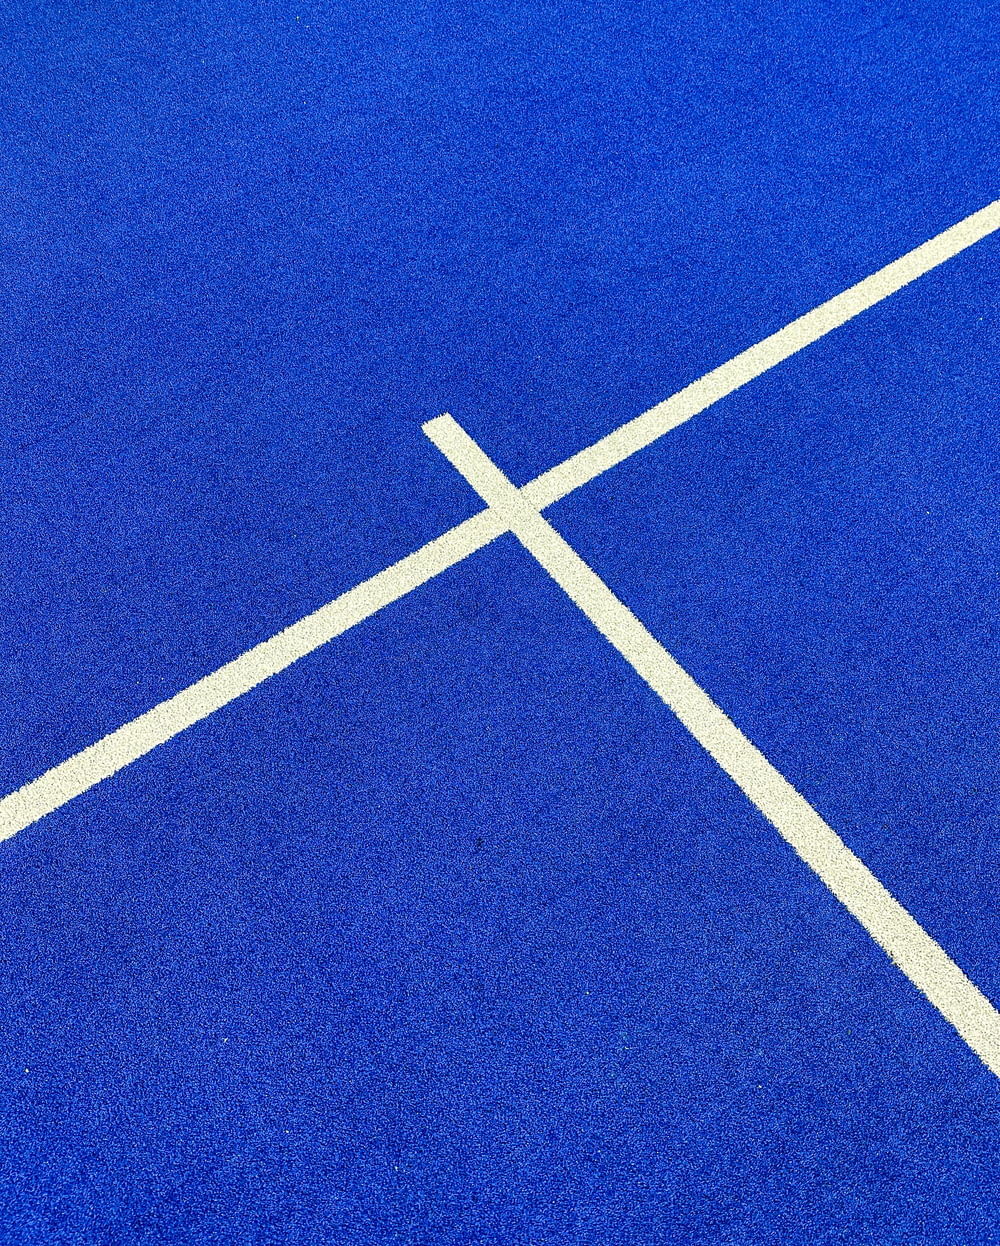 a blue tennis court with white lines on it